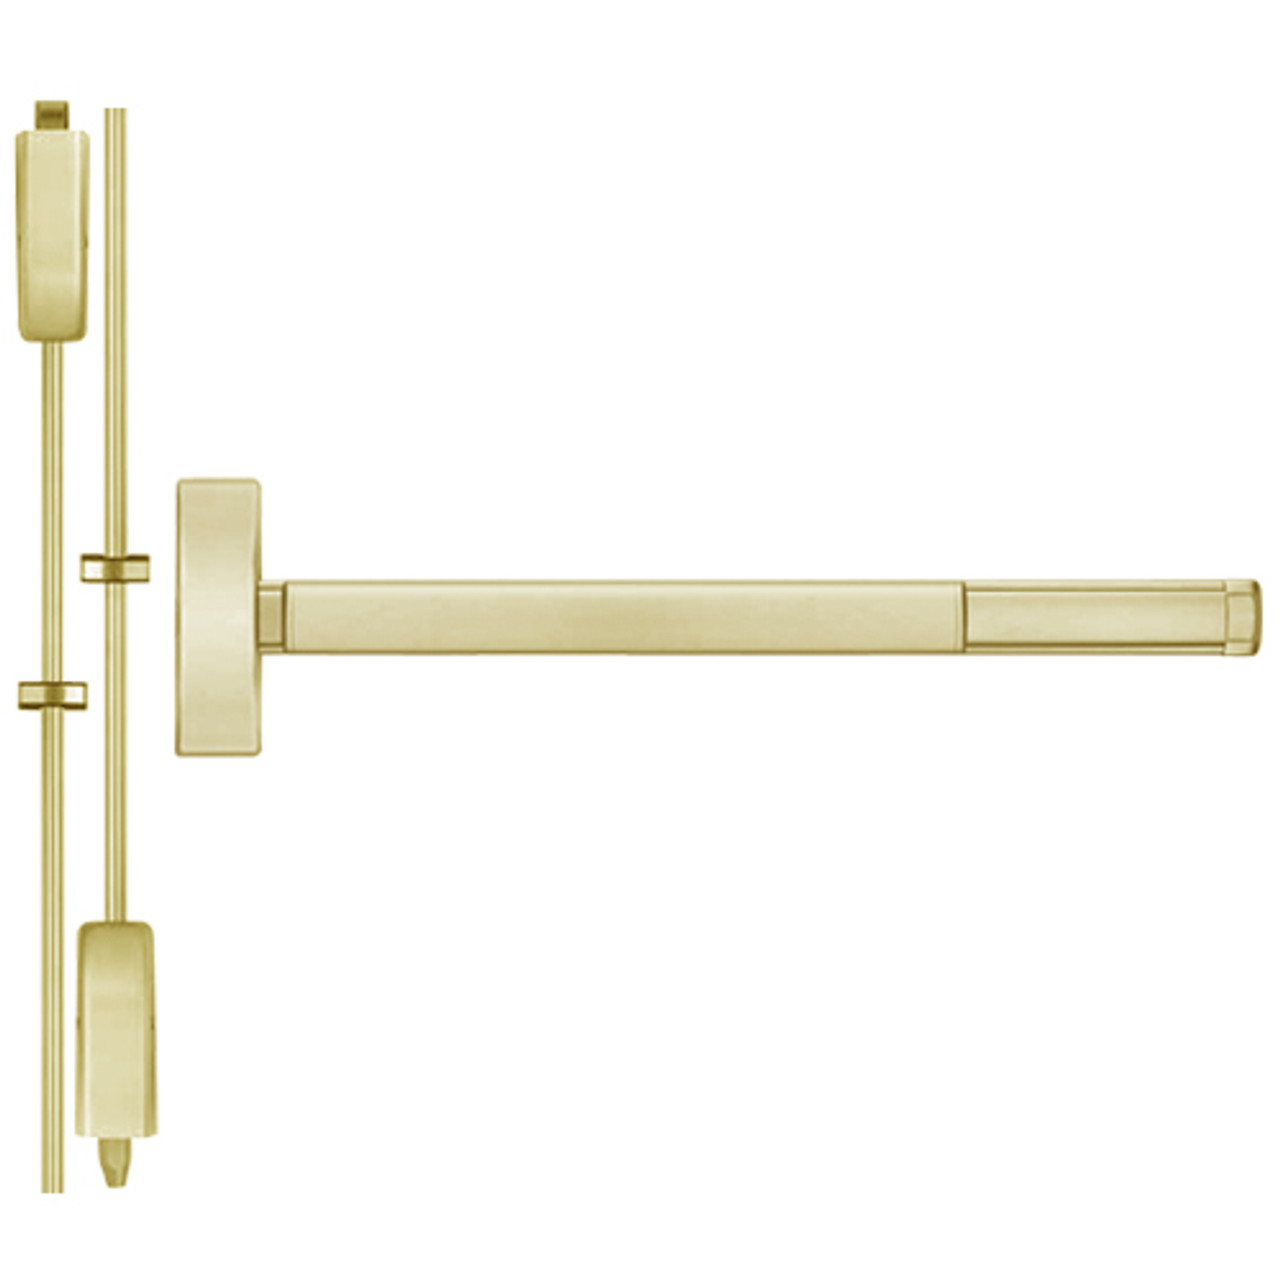 TSFL2208-606-48 PHI 2200 Series Apex Surface Vertical Rod Device with Touchbar Monitoring Switch Prepped for Key Controls Lever/Knob in Satin Brass Finish